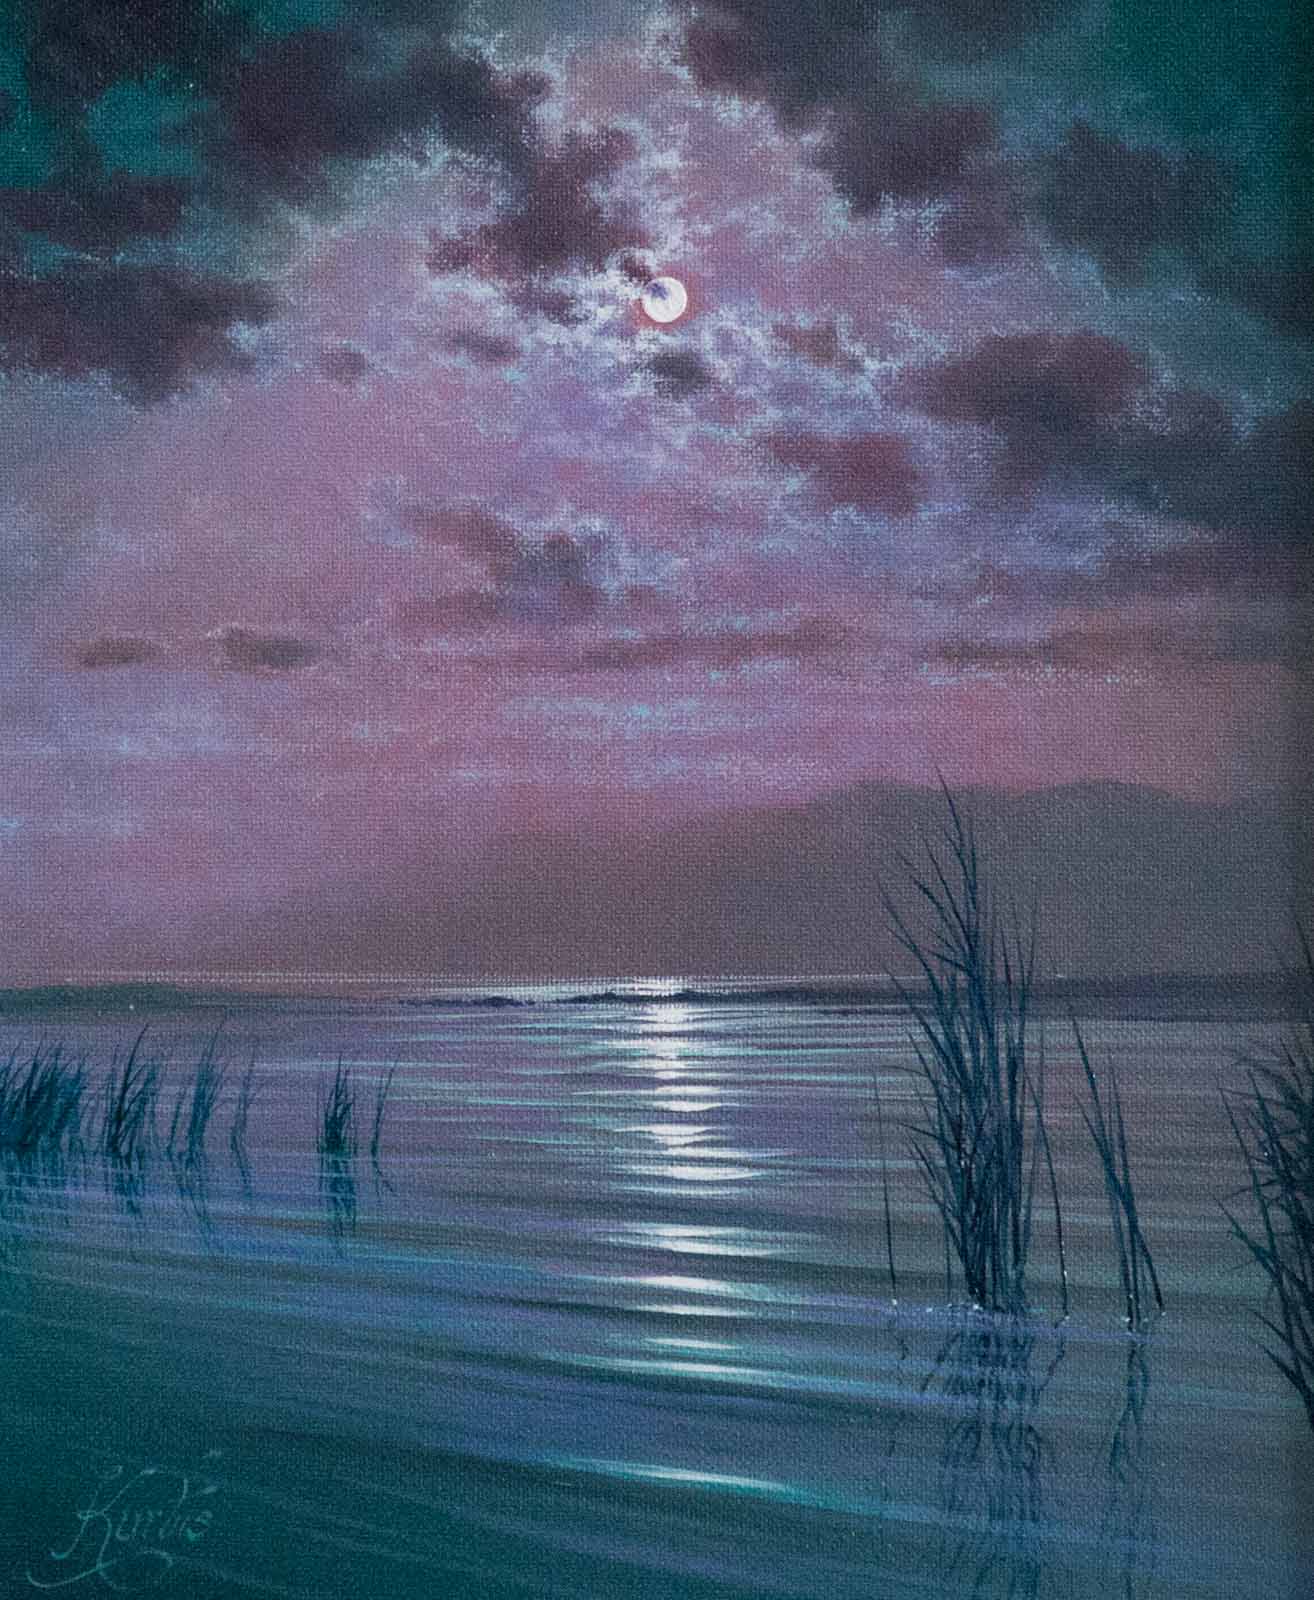 Moonlight Relections